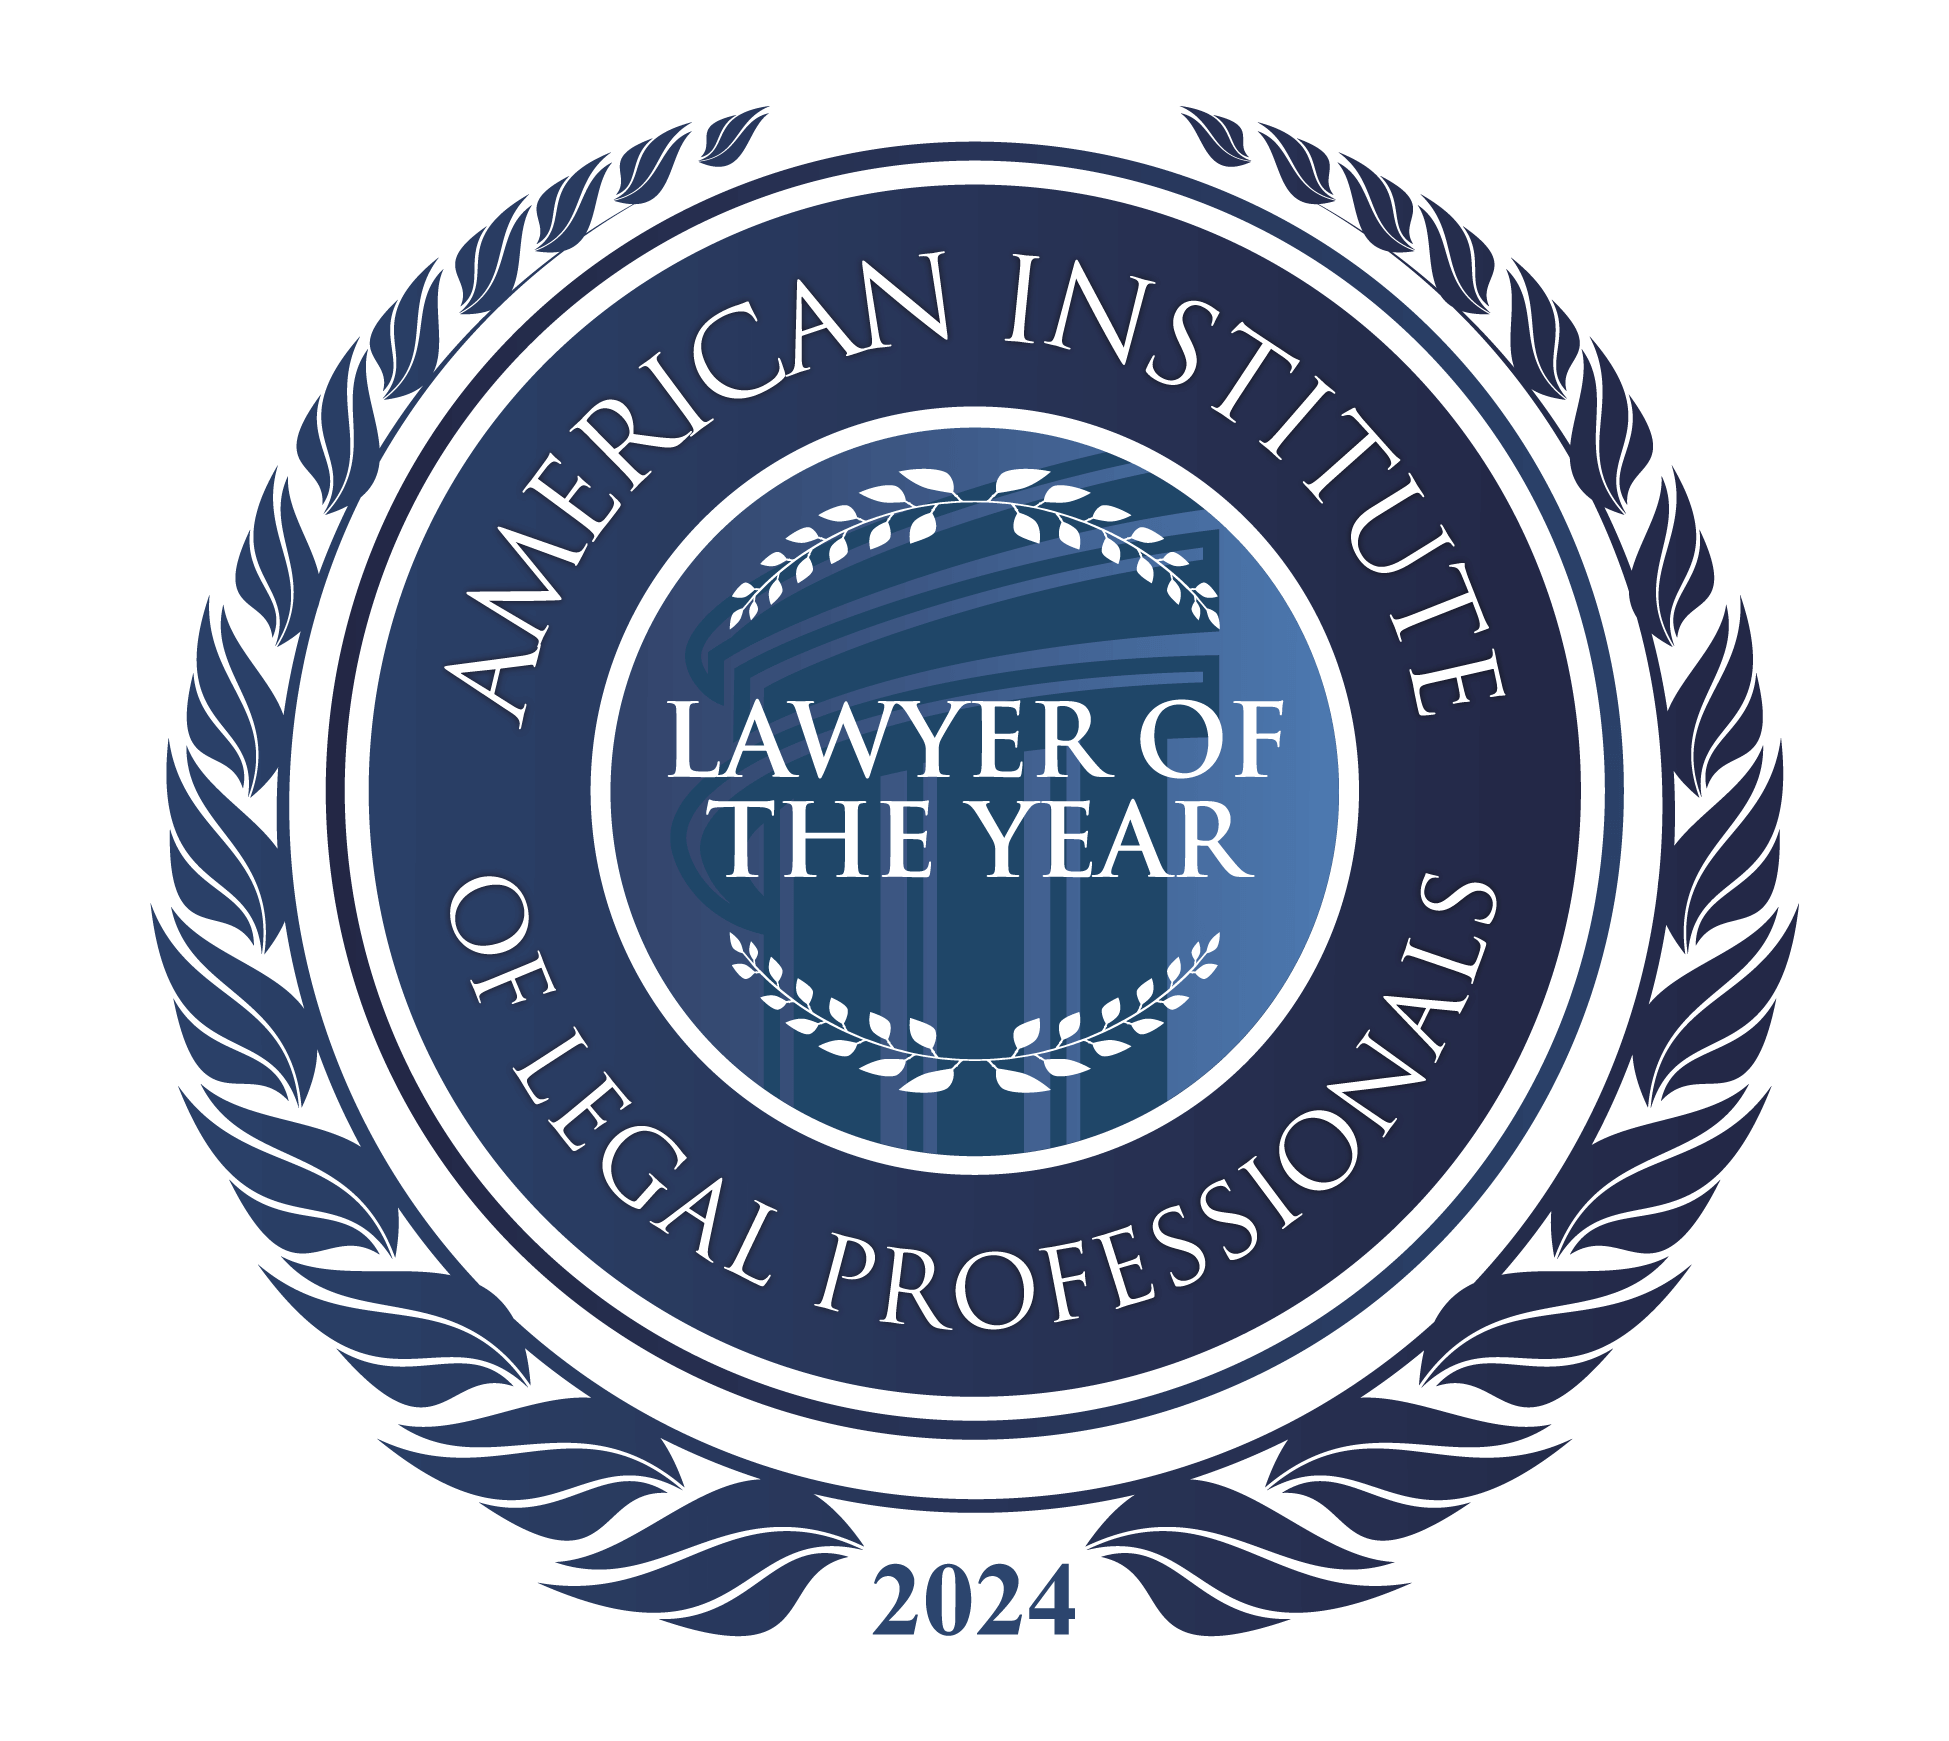 American Institute of Legal Professionals - Lawyer of the Year 2021